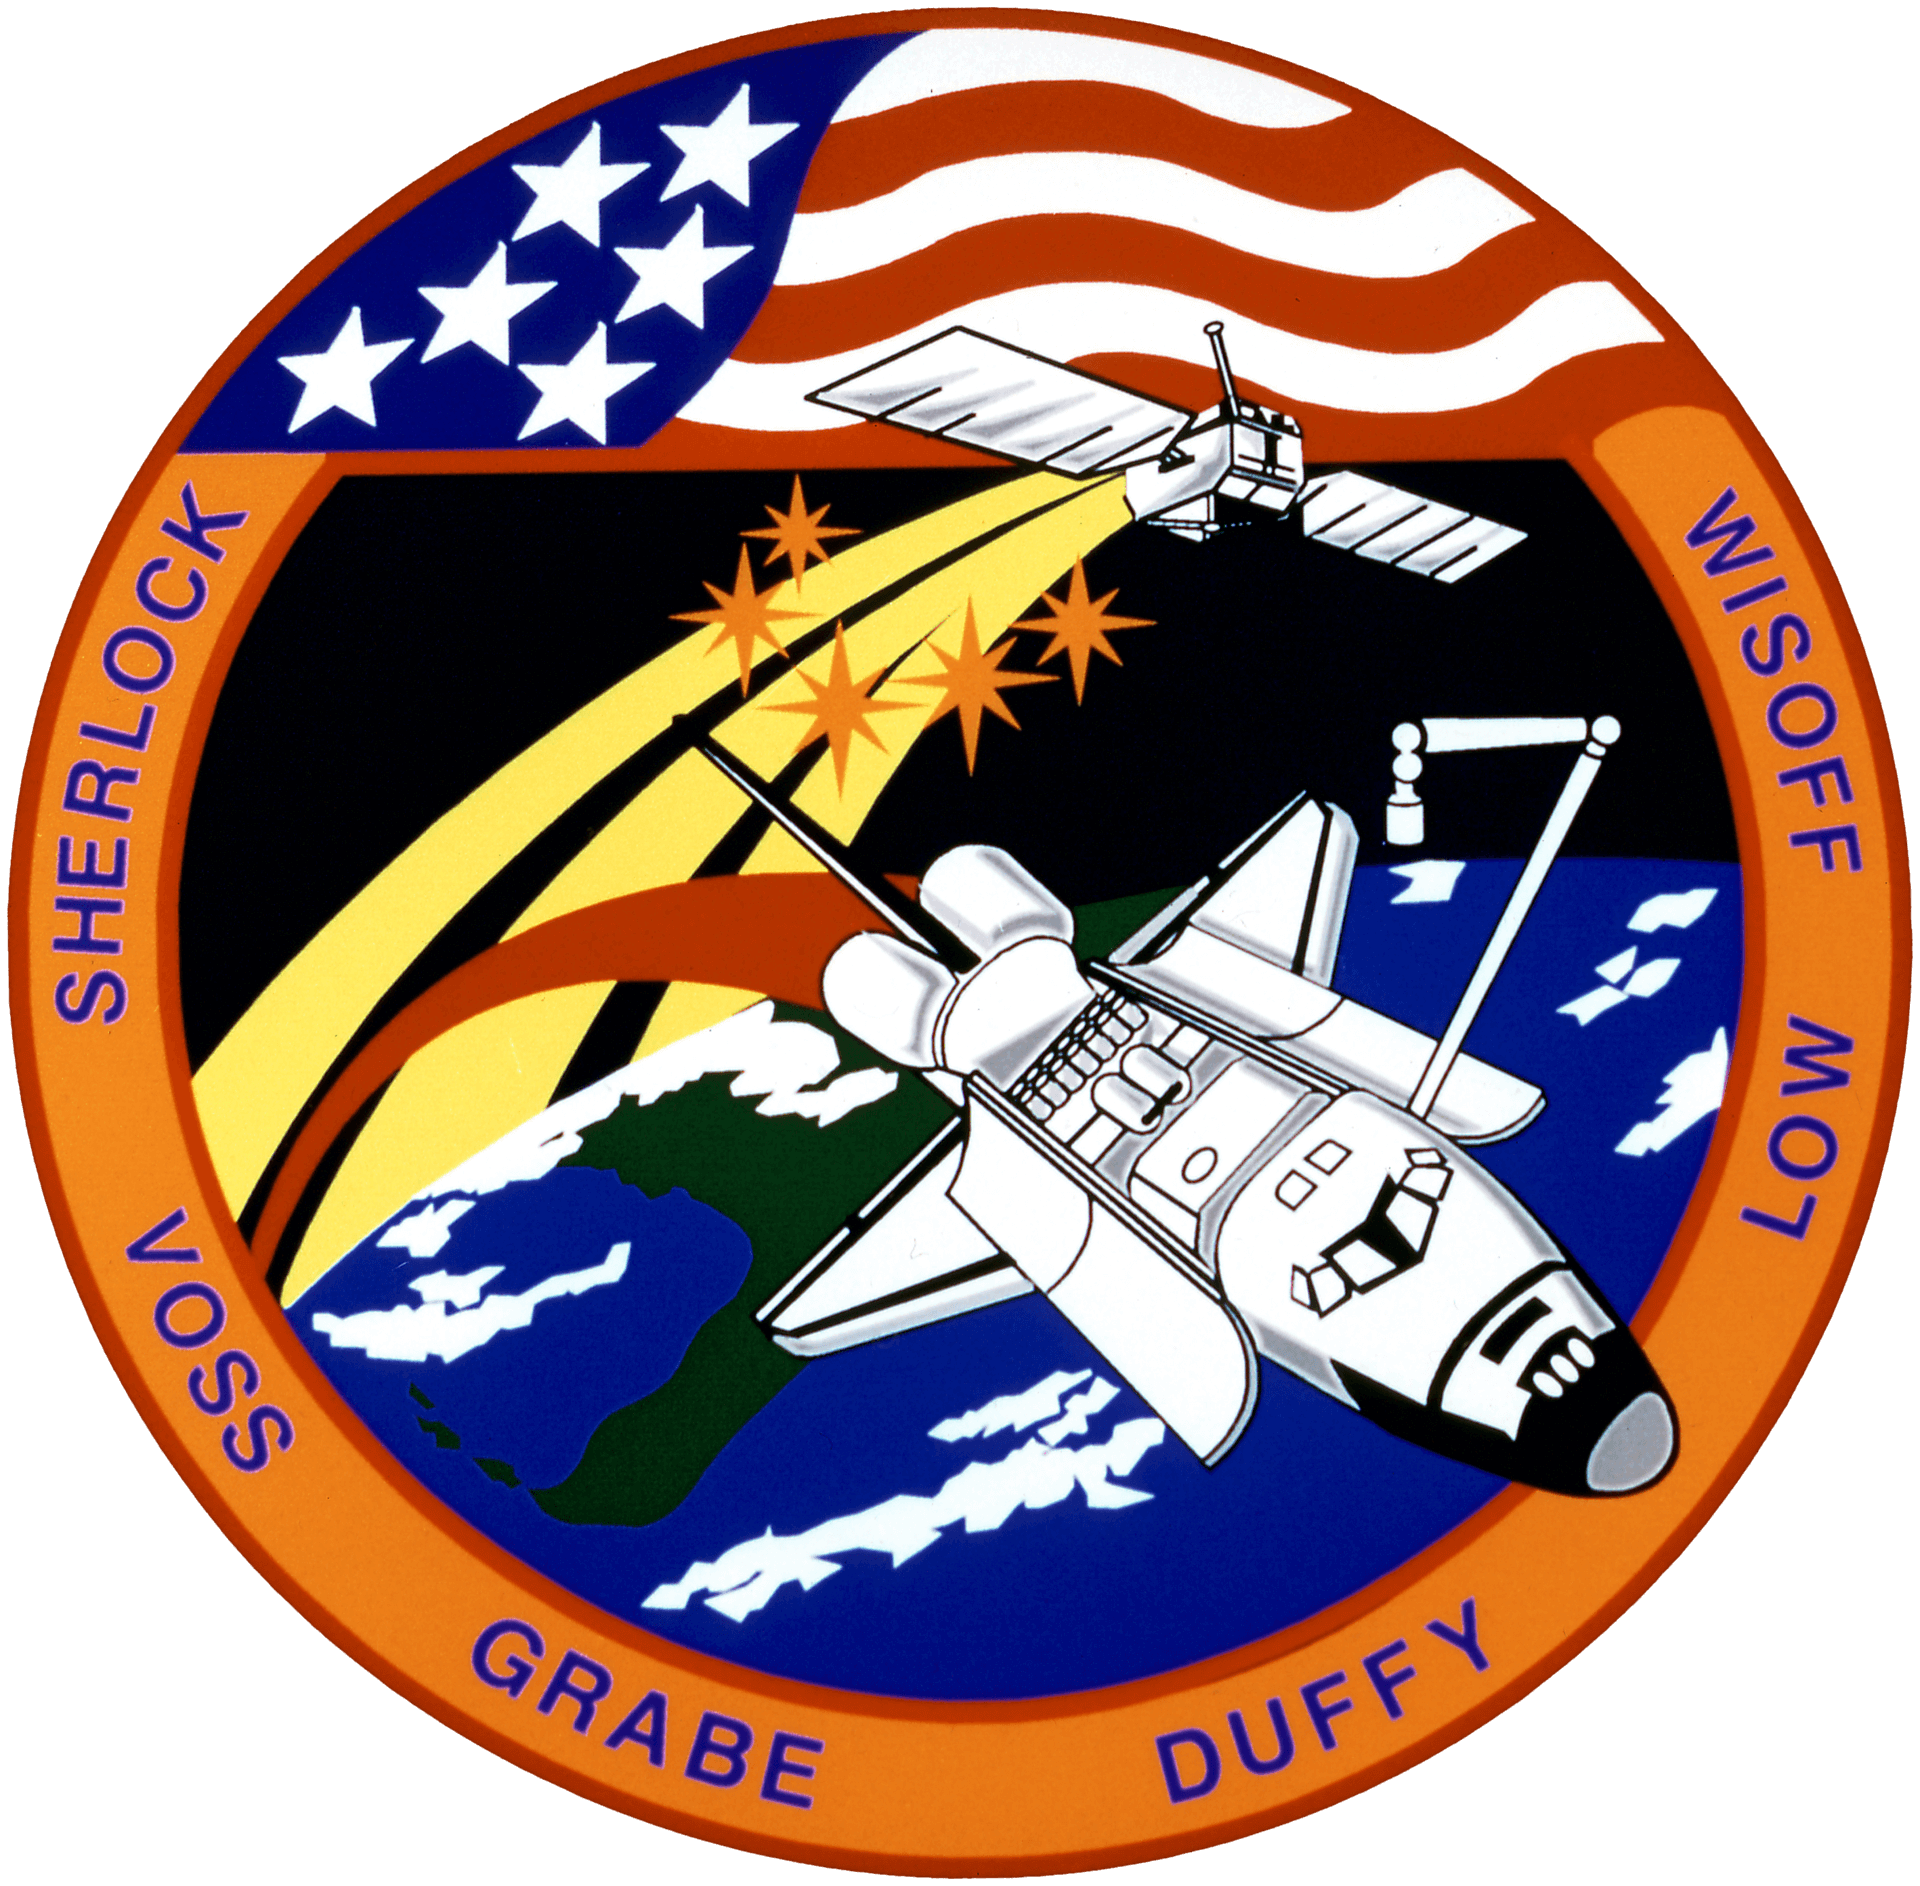 Mission patch for STS-57